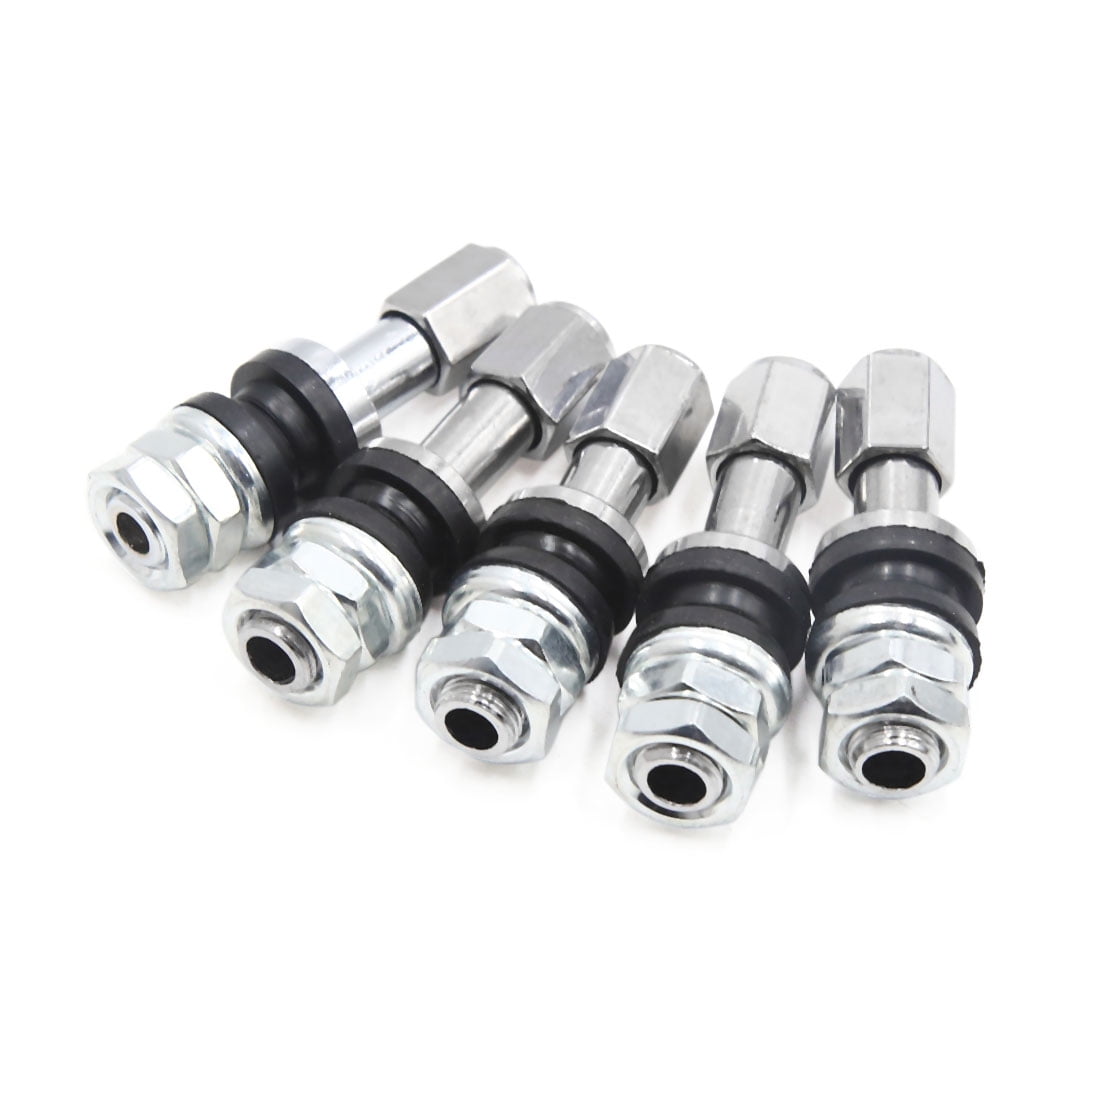 HIGHER MEN Durable Bolt-in Stainless Steel Car Motorcycle Tubeless Wheel Tyre Tire Valve Stems with Dust Caps Tire Valve Stems Cap Car Accessories Reliable Quality 